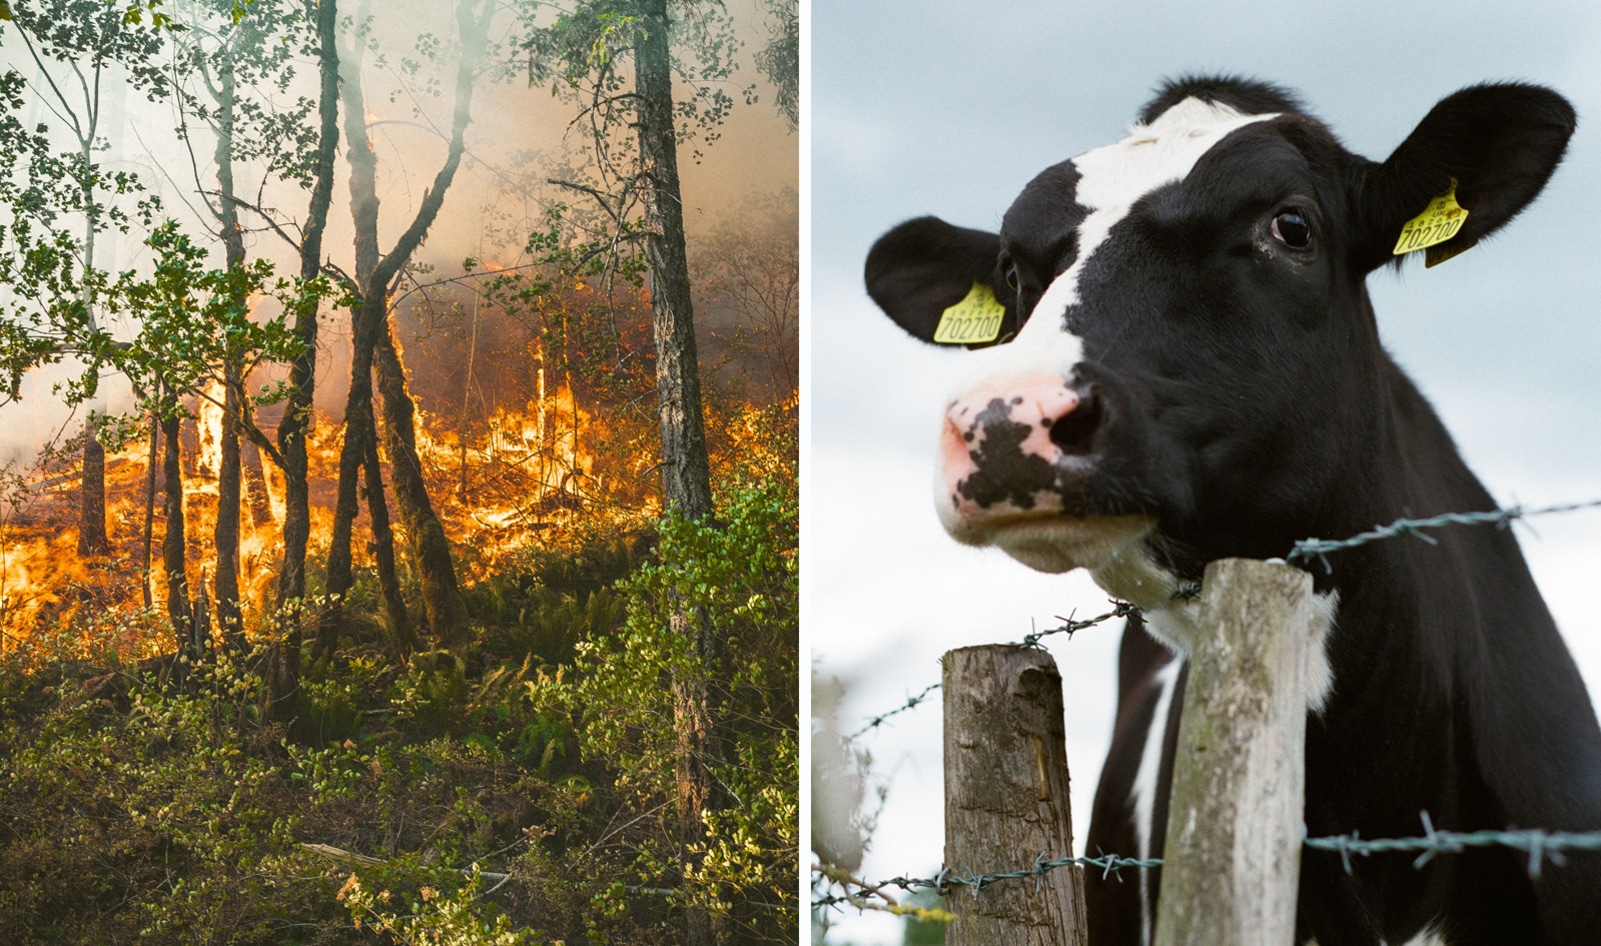 We Only Have Five Years to Halt Climate Change, Says UN Report. Replacing Animal Agriculture Could Help.